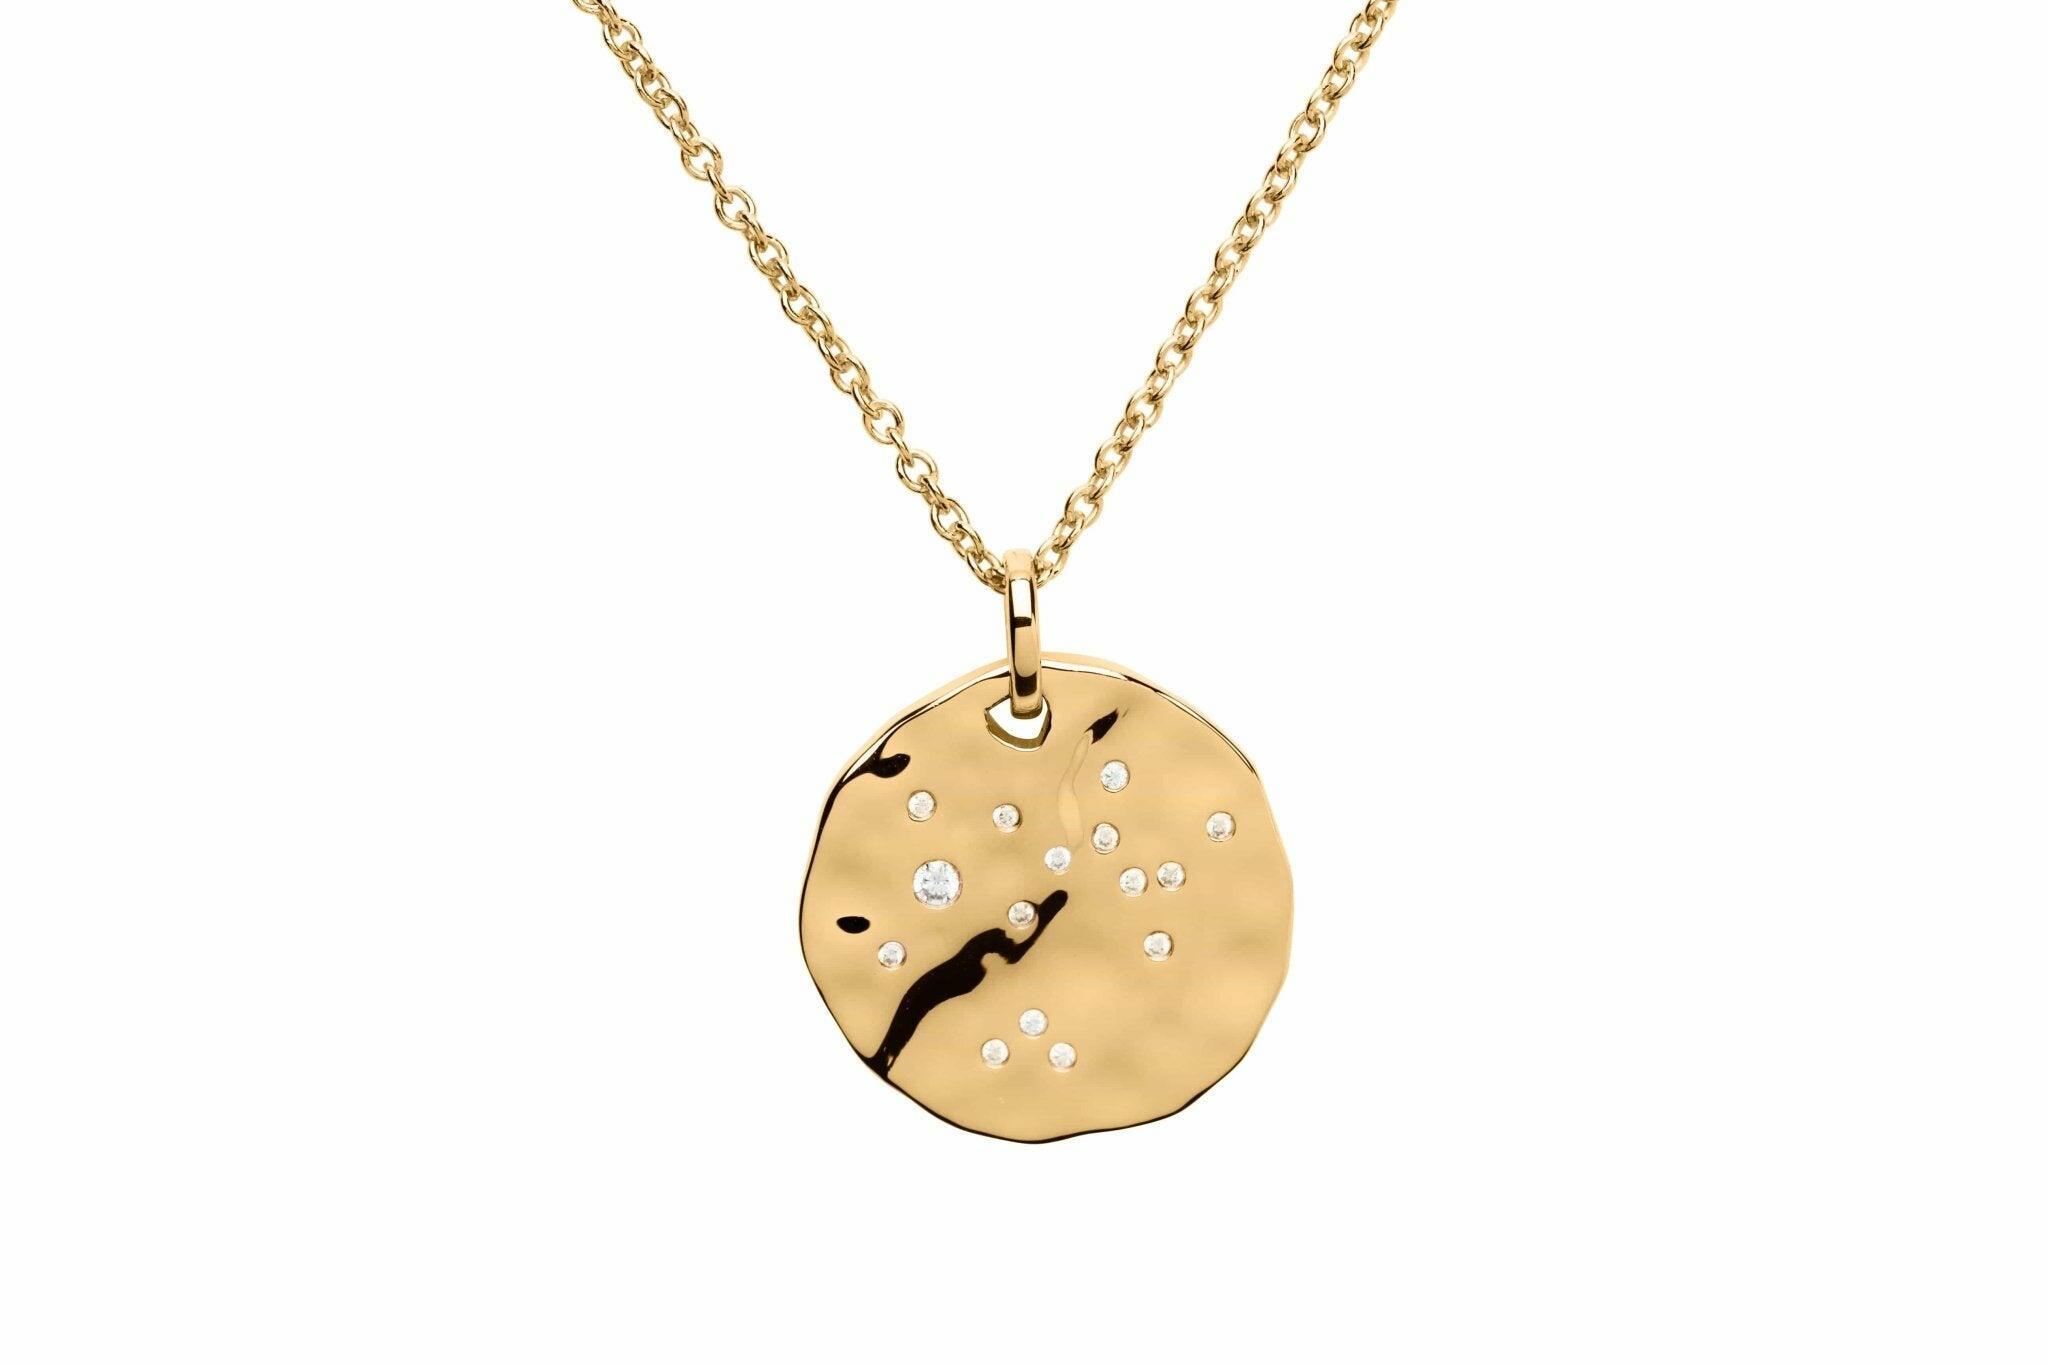 Unique & Co Hammered 18 Carat Gold & Cubic Zirconia Zodiac Constellation Libra Birthday Necklace Pendant - The Classic Watch Buyers Club Ltd